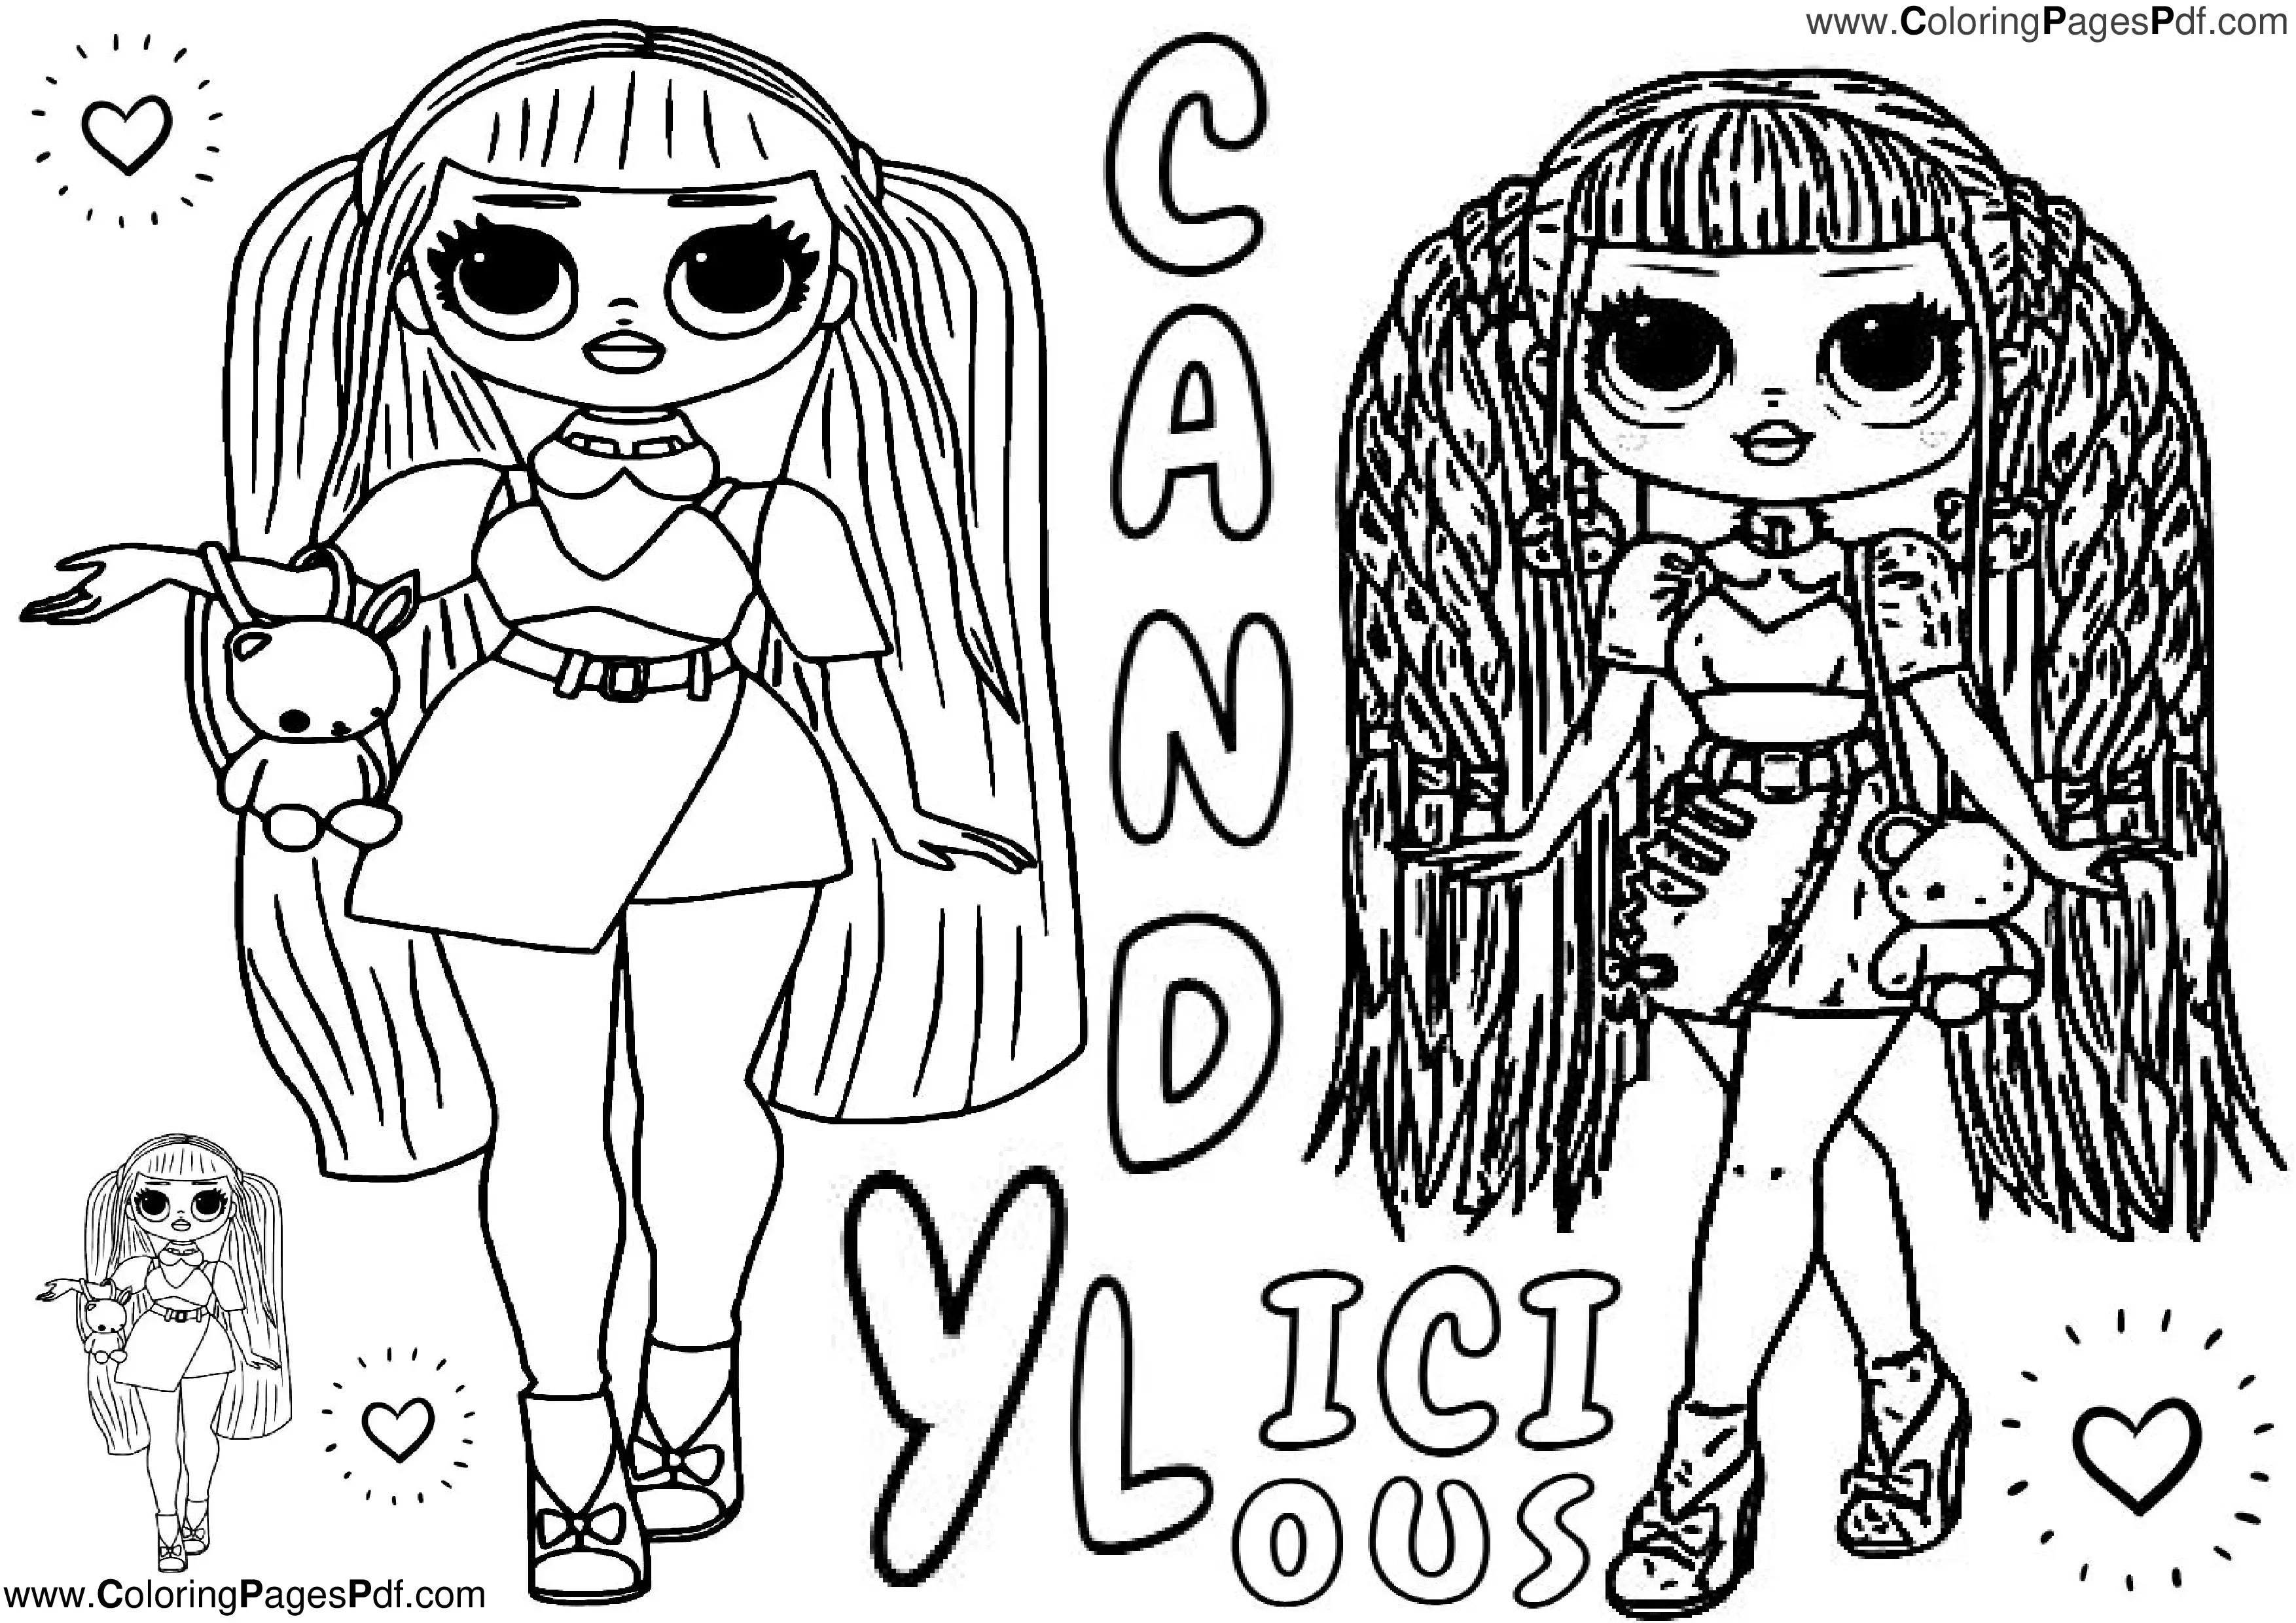 Lol omg candylicious coloring pages